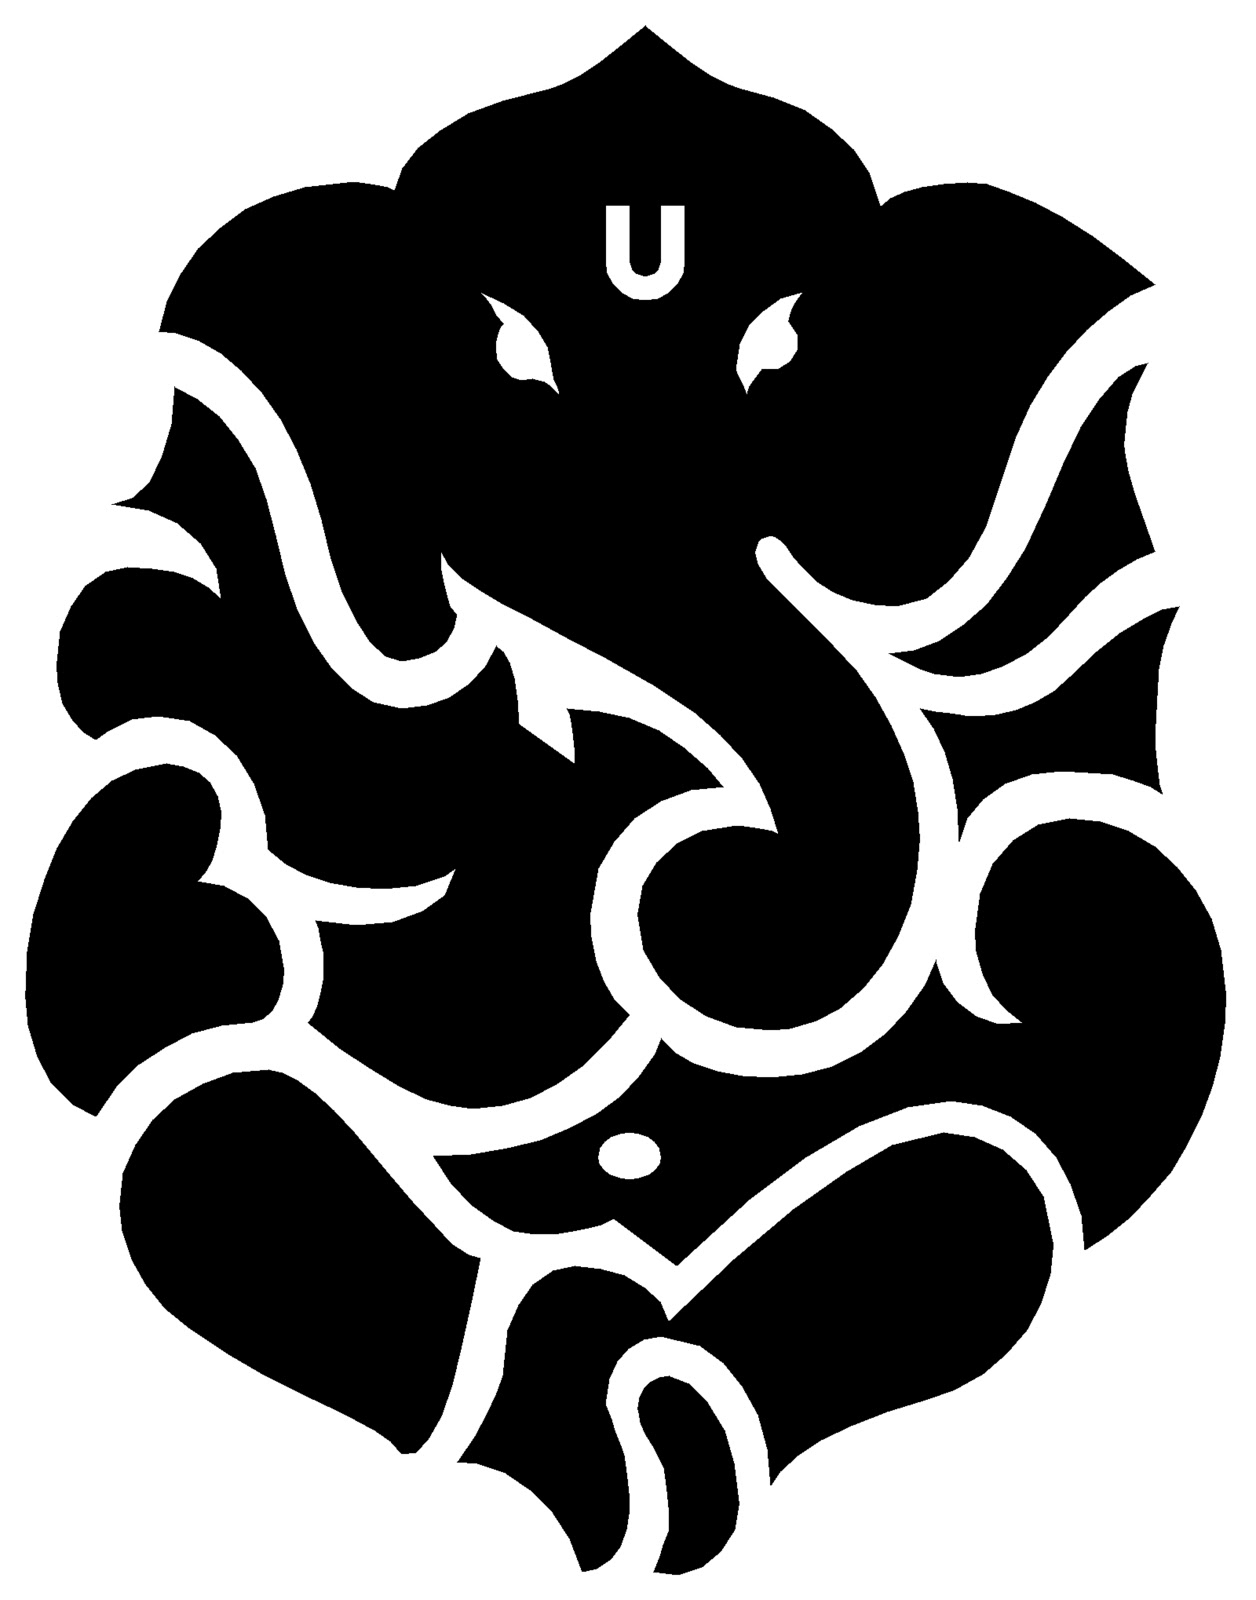 Free Ganesha Clipart, Download Free Ganesha Clipart png image, Free ClipArts on Clipart Library